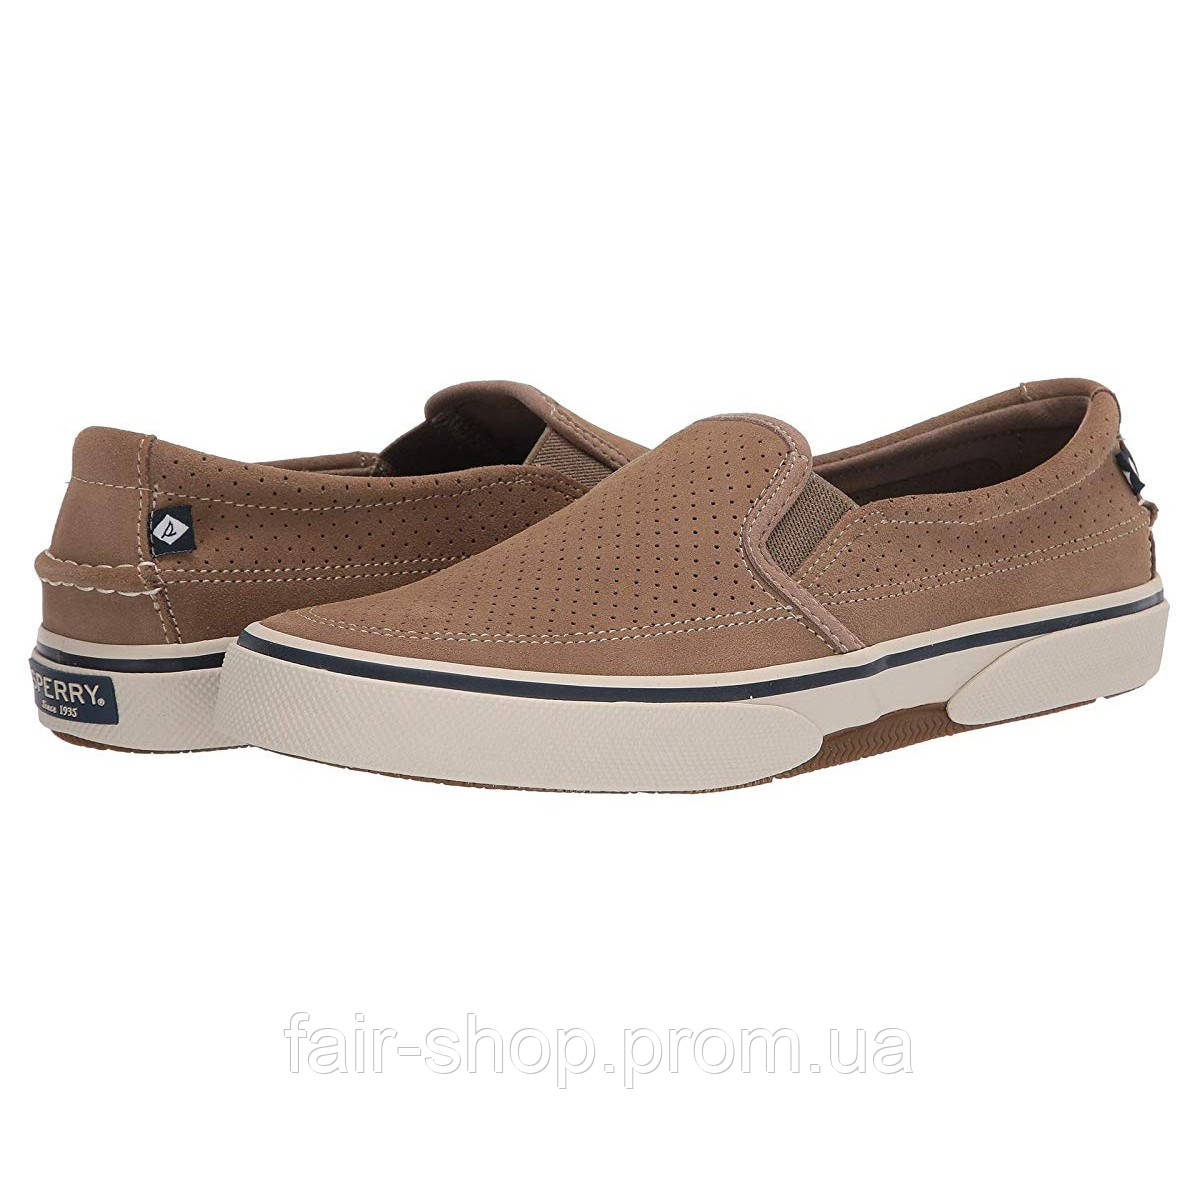 sperry suede slip on